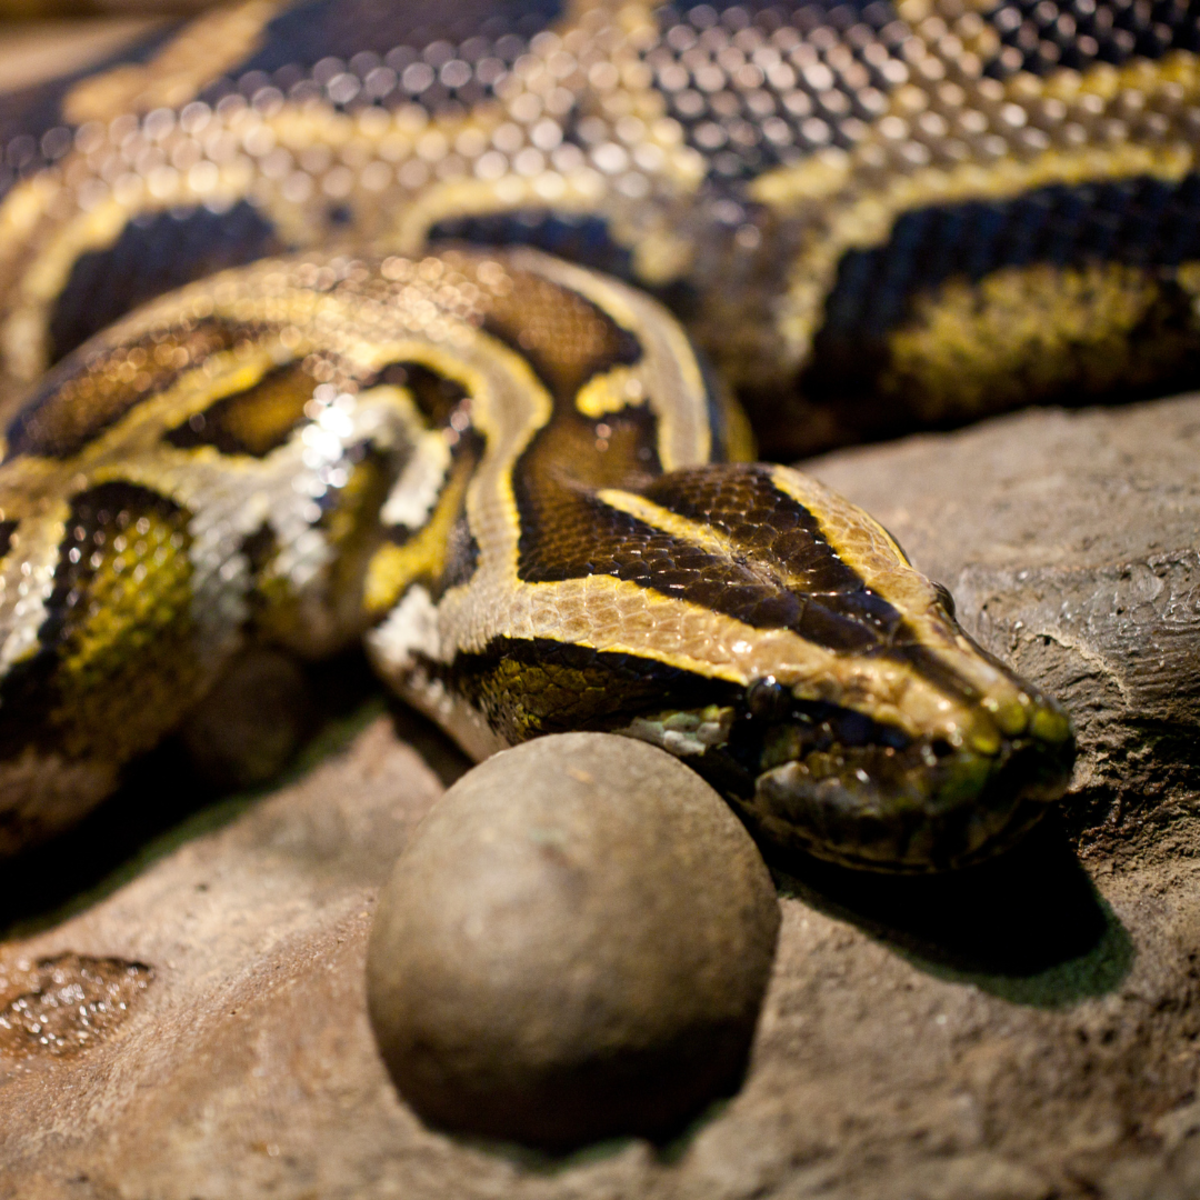 Anacondas are semi-aquatic constrictors and the world's largest snakes by weight.